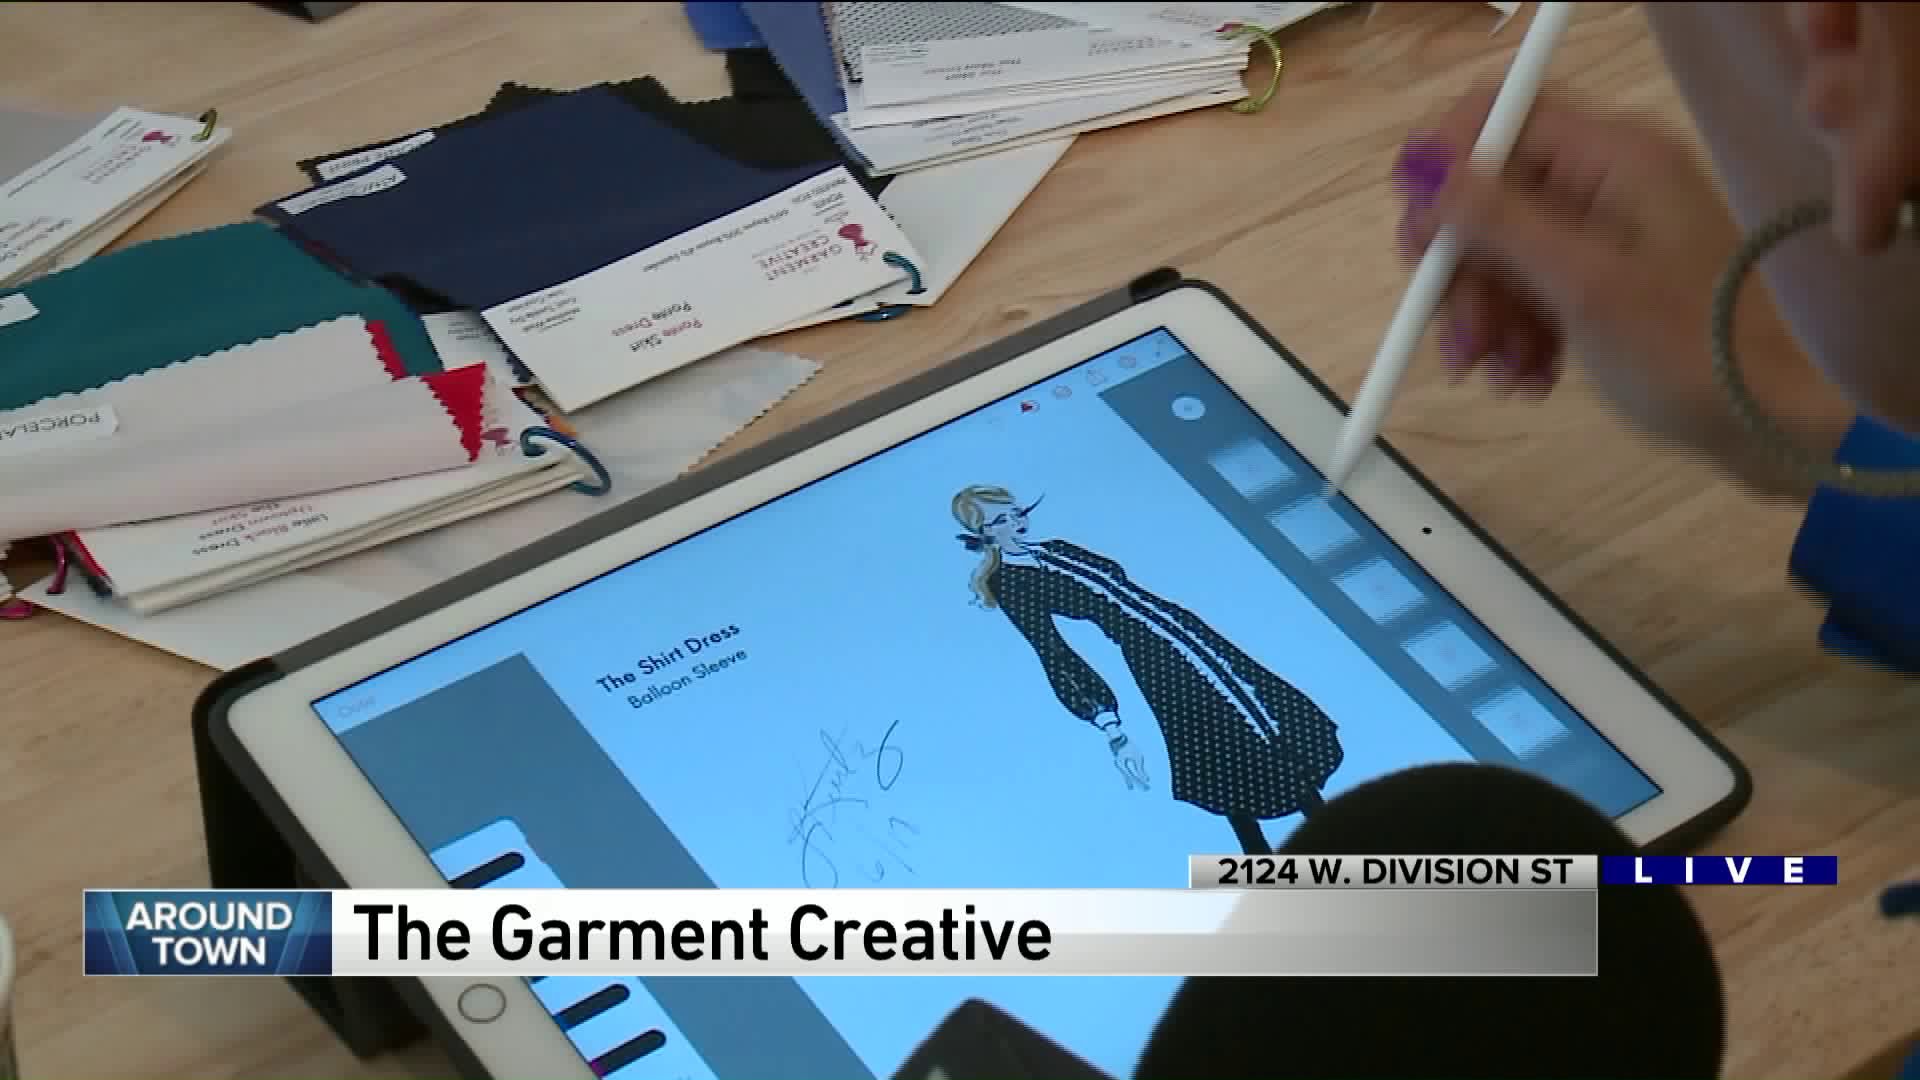 Designing fashion at The Garment Creative with Around Town